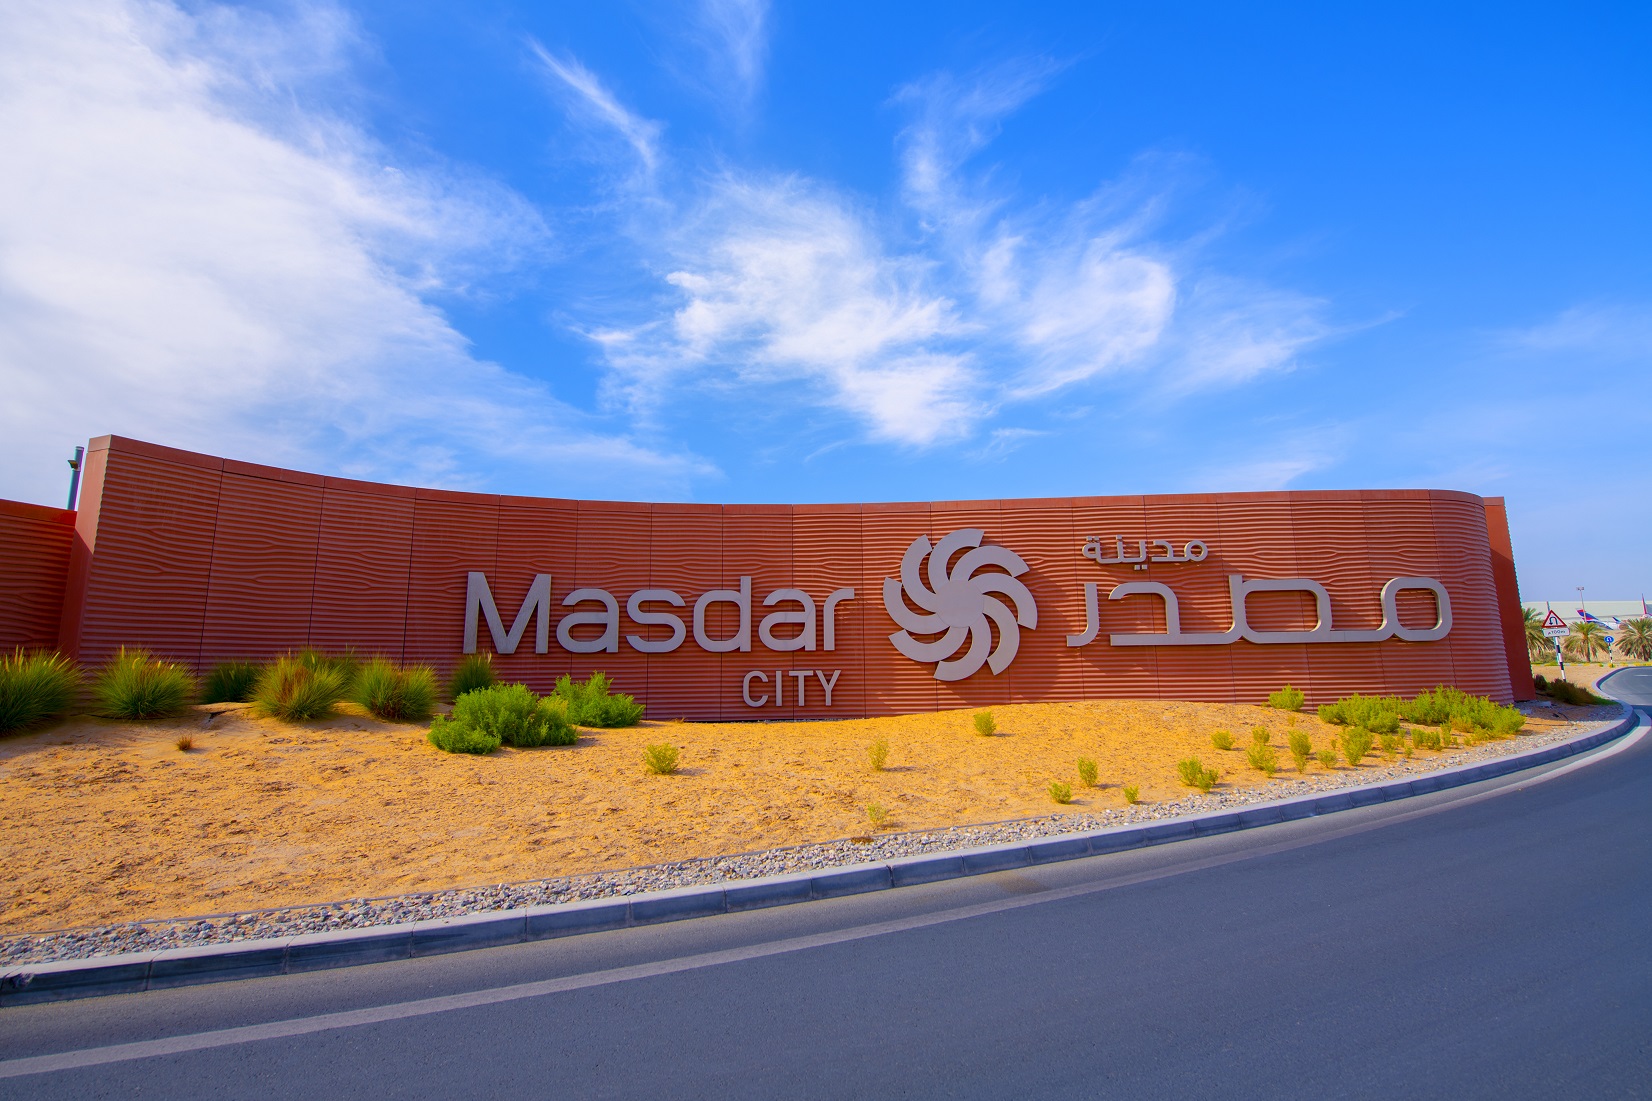 Masdar City And The UAE Space Agency Announce Exclusive Business Package For Start-Ups And SMEs At The UAE’s First Space Economic Zone